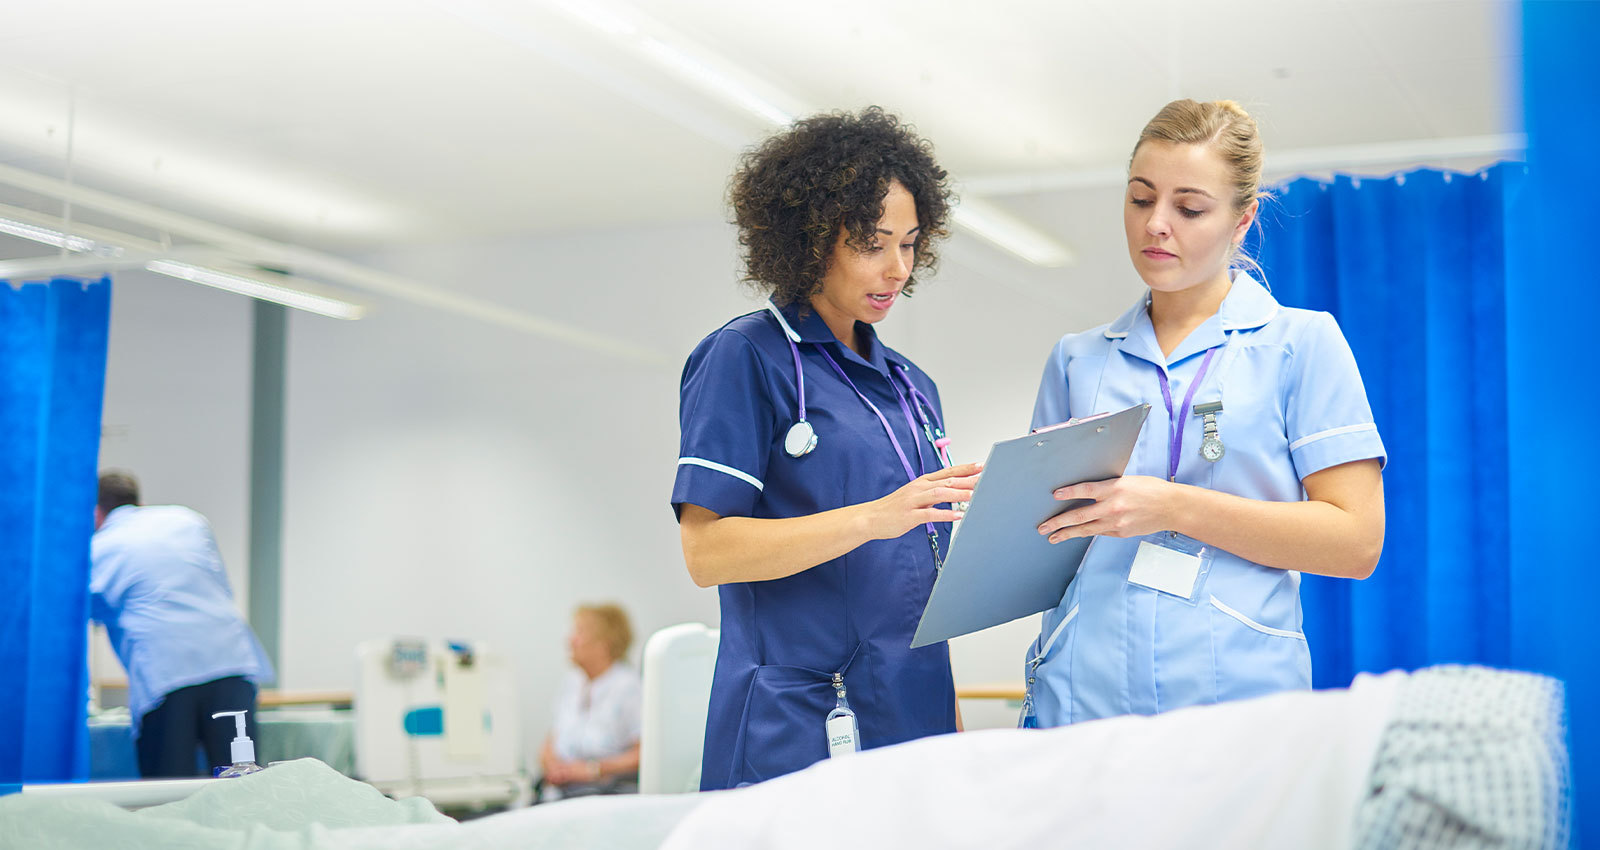 Nurse and physician review patient chart together in a hospital setting.